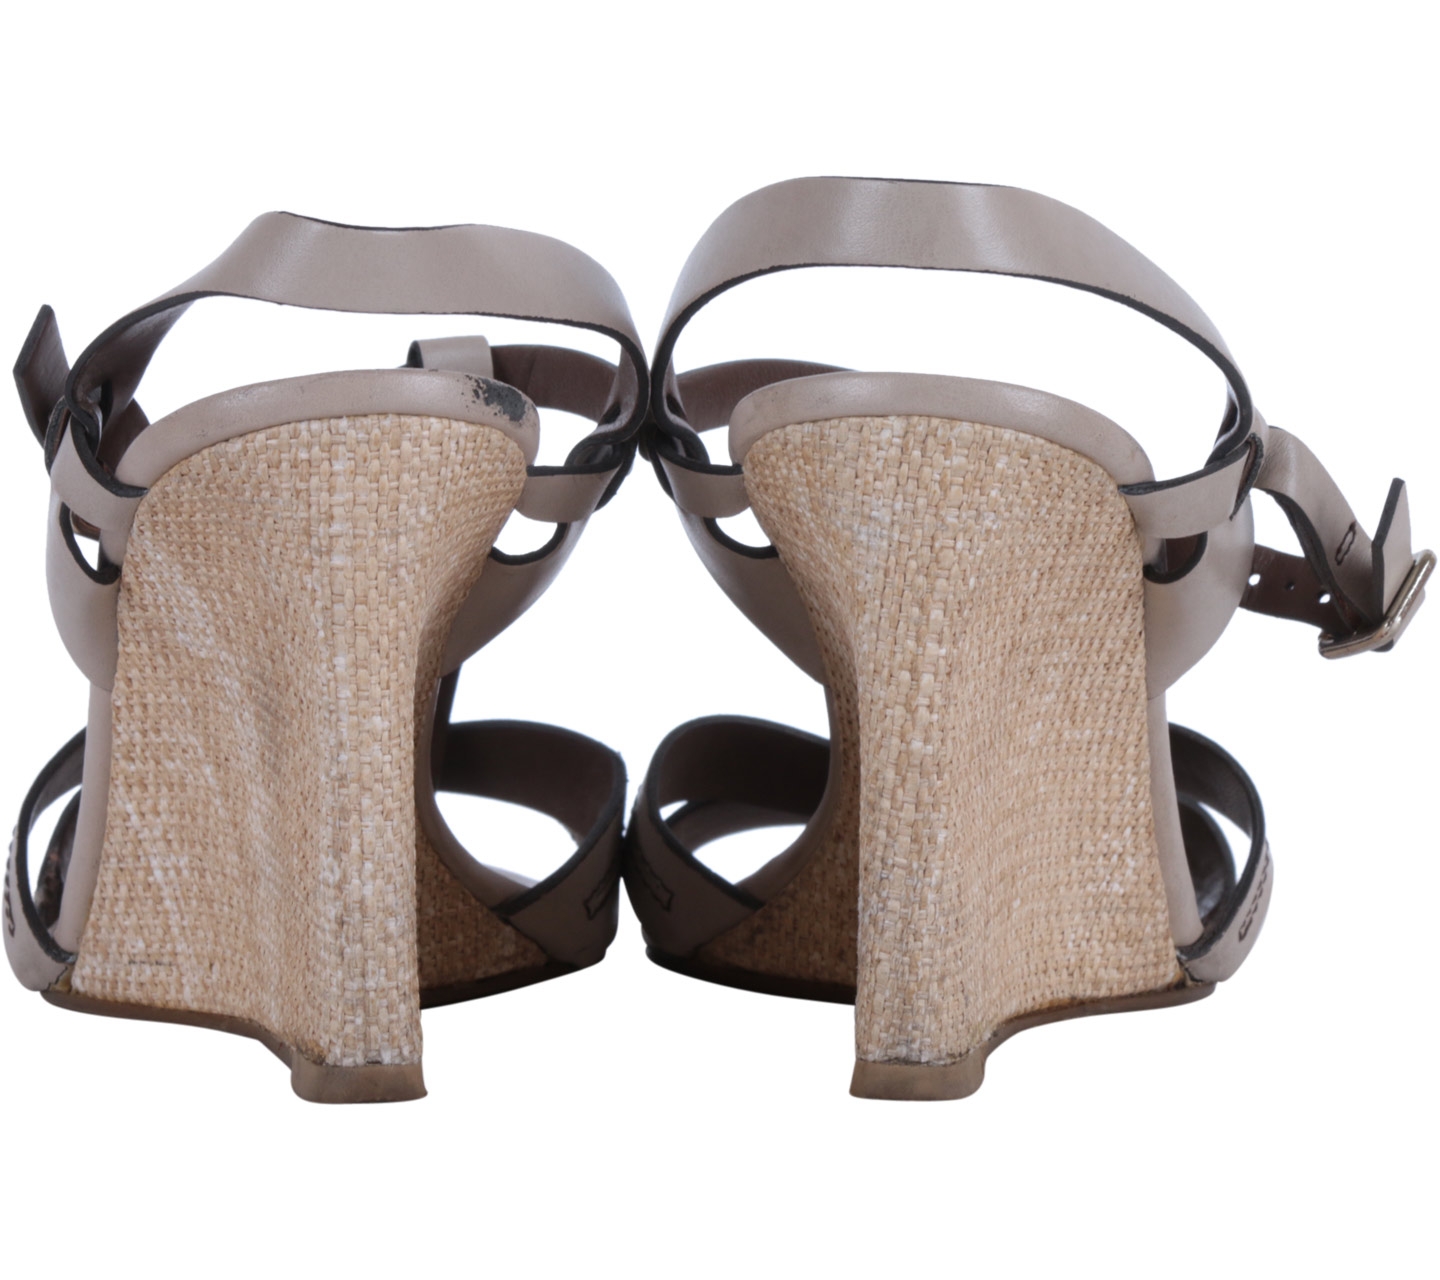 Charles and Keith Grey T-Strap Sandals Wedges